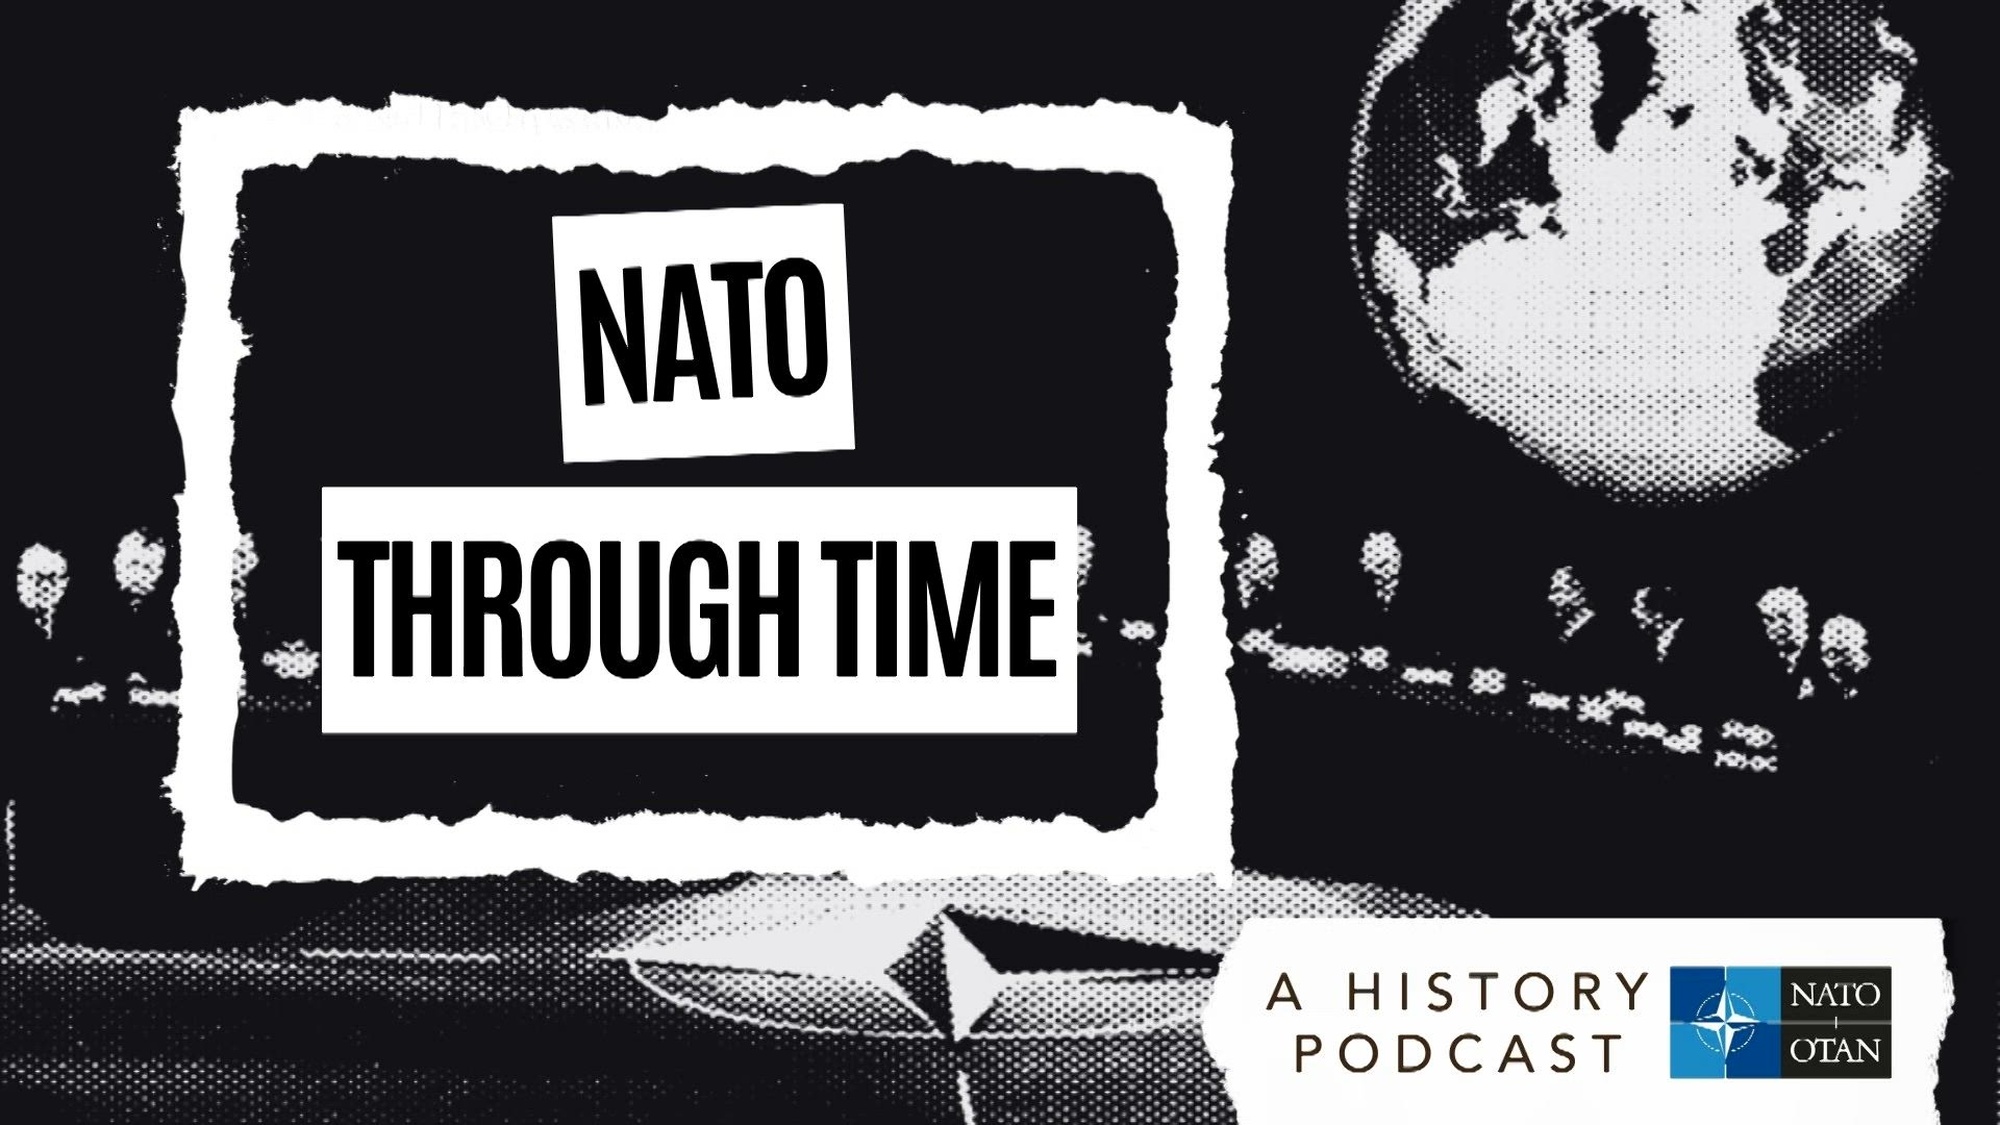 Welcome to the NATO Through Time podcast!

This podcast dives deep into NATO’s history, reflecting on how the past influences the present – and future – of the longest-lasting alliance in history.

Our first episode introduces the podcast’s co-hosts: former NATO Spokesperson Jamie Shea, along with young content creators Ben Wheeler, Maciej Musiał and Paulius Mikolaitis, who are helping tell NATO’s story to the next generation.

Join them in this initial episode on a 15-minute whirlwind tour of NATO’s 75-year history – from the creation of the Alliance in 1949, to the fall of the Berlin Wall in 1989, to NATO’s first out-of-area operations and the first wave of post-Cold War enlargement in the 1990s. The following episodes will cover all of these topics, and many more, in greater depth.